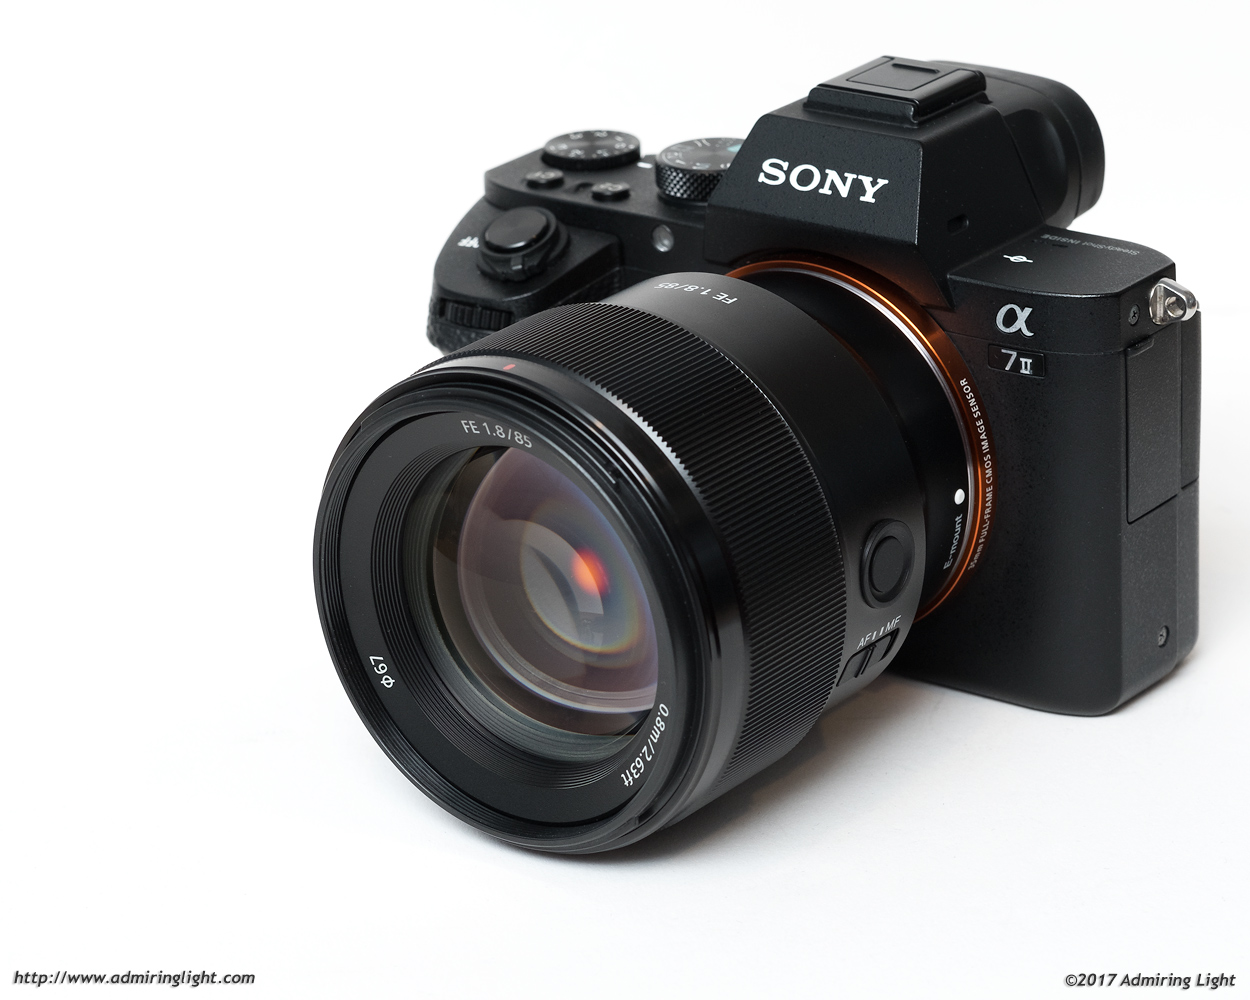 Sony FE 85mm f/1.8 on the Sony A7 II